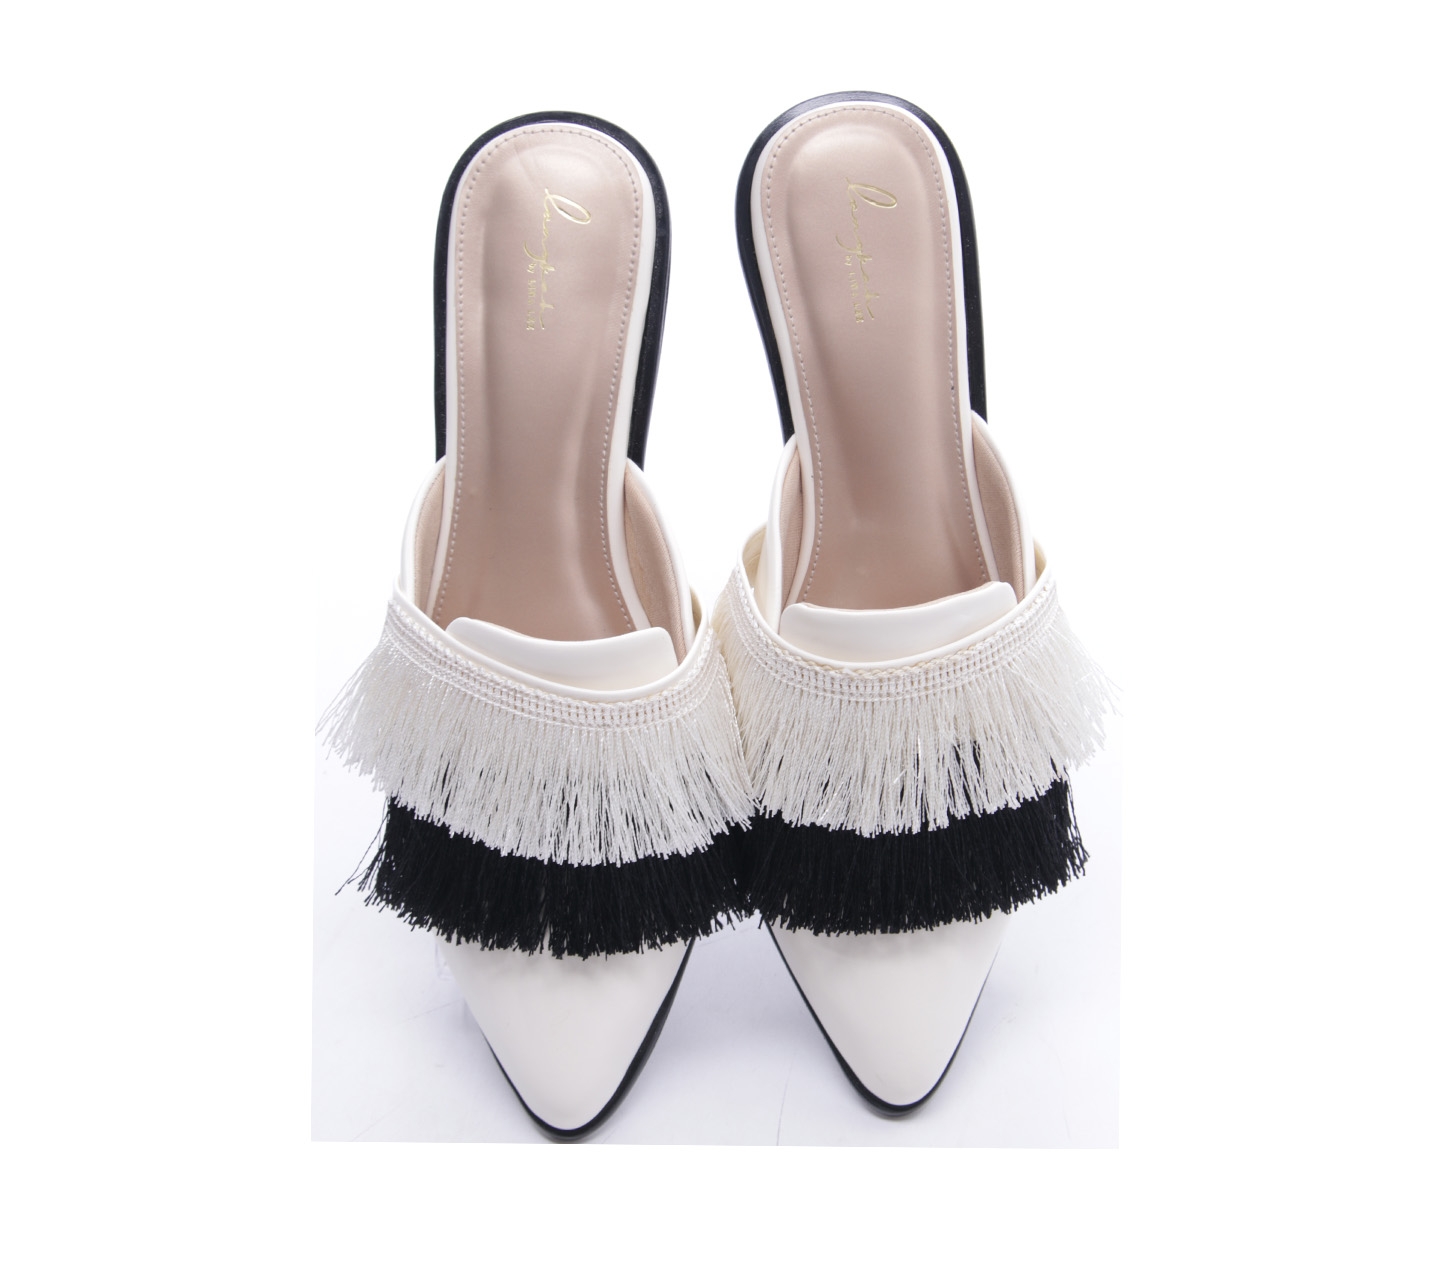 Langka by Lina Lee Off White & Black Mules Tessel Sandals